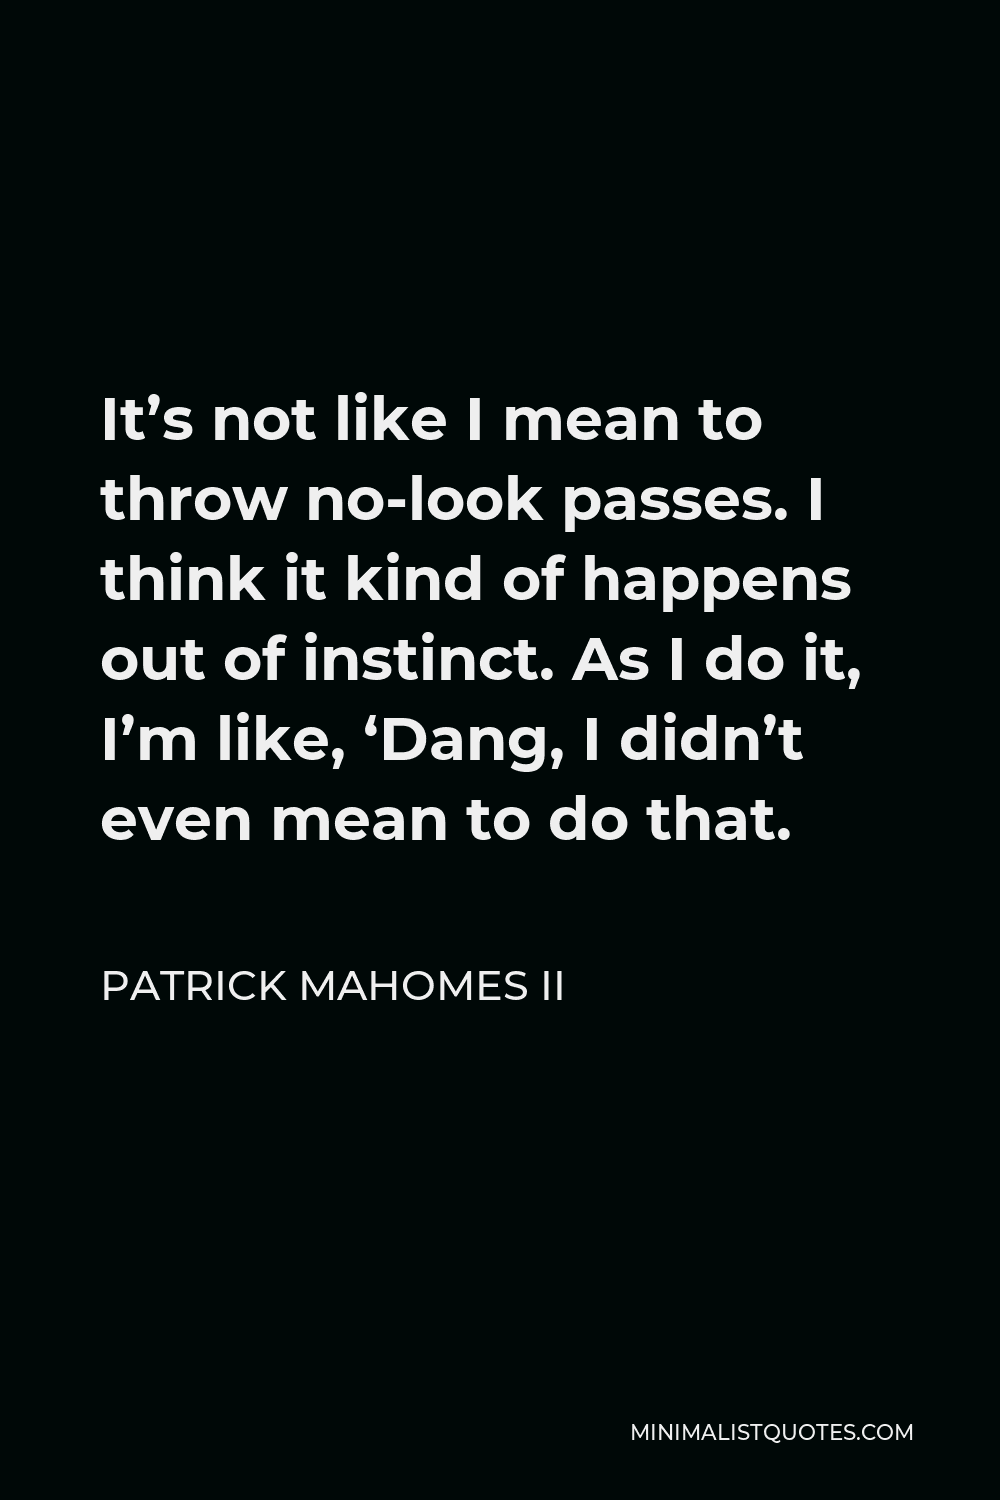 Patrick Mahomes II Quote: Every experience, good or bad, you have to ...